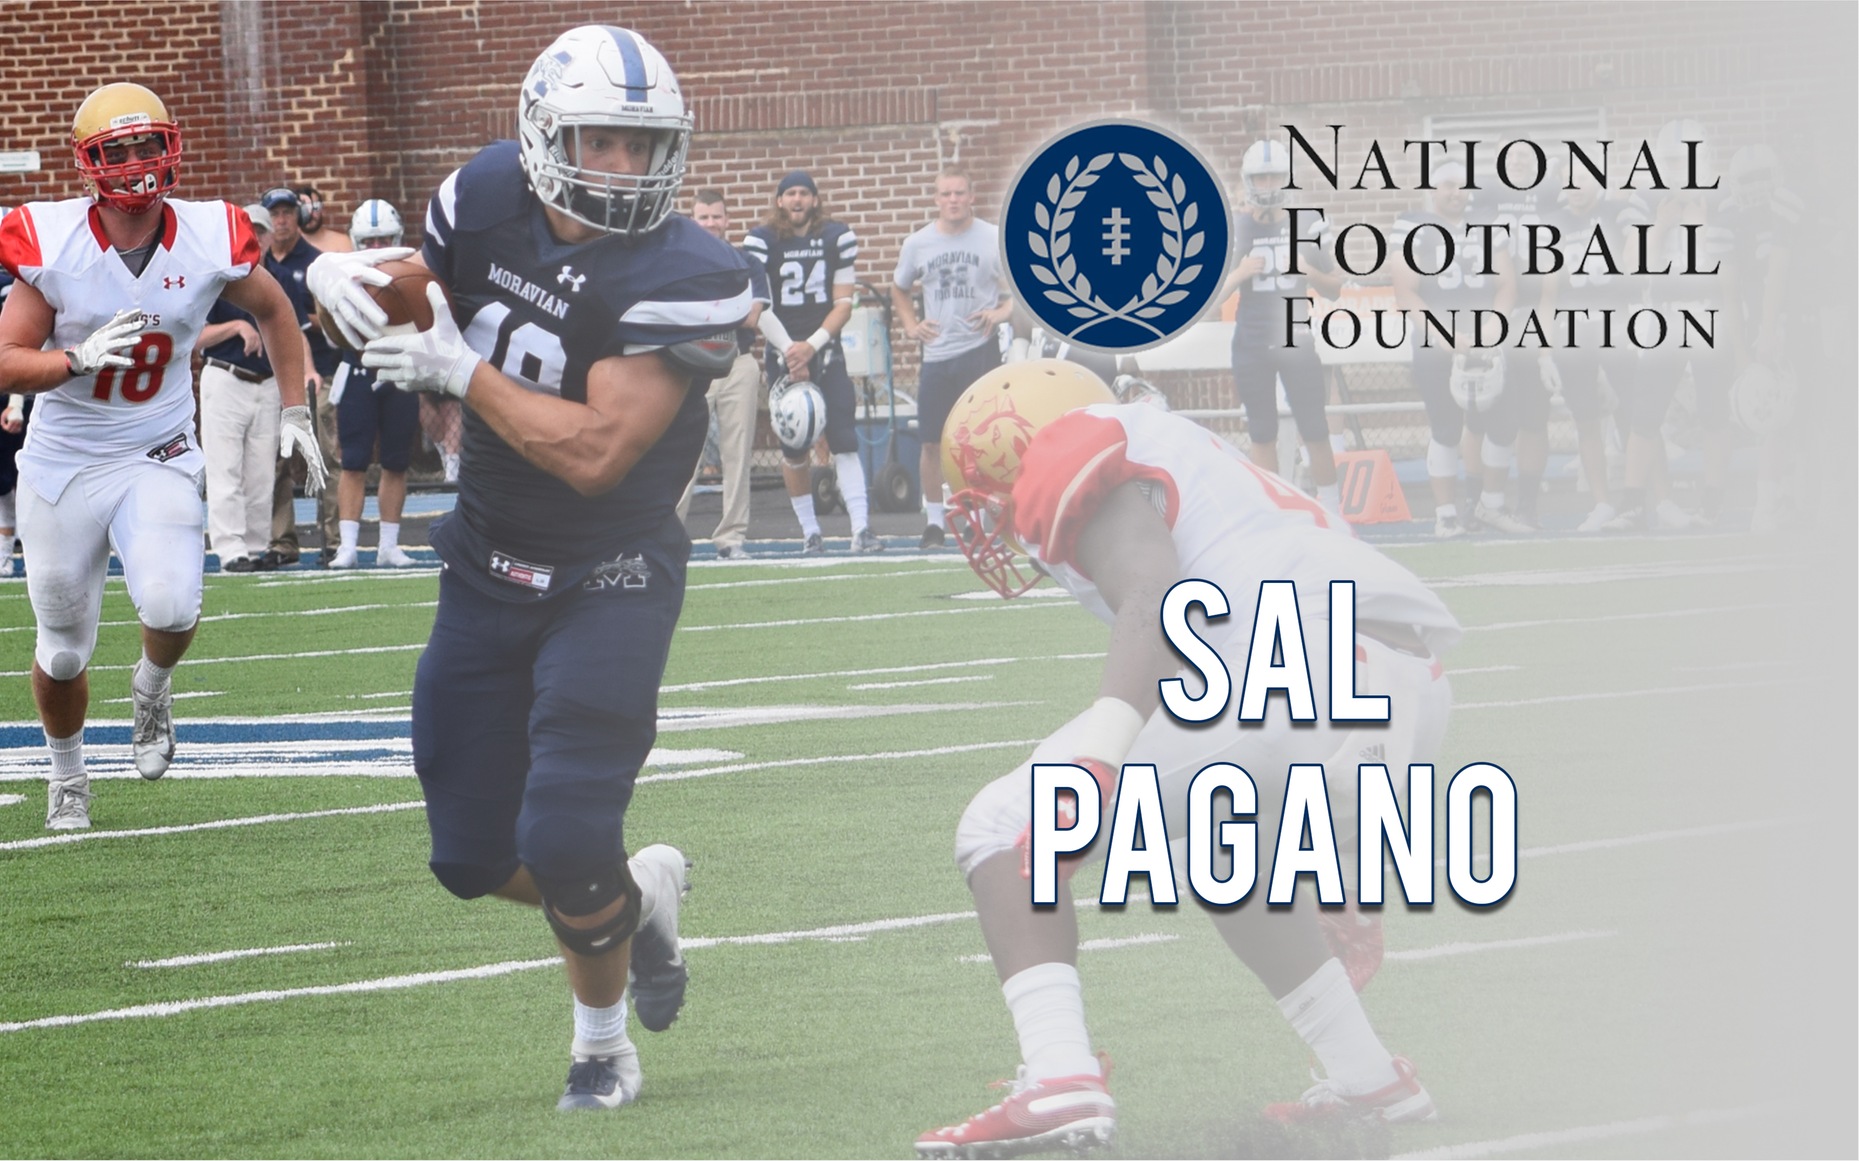 Sal Pagano named semifinalist for National Football Foundation's William V. Campbell Trophy.